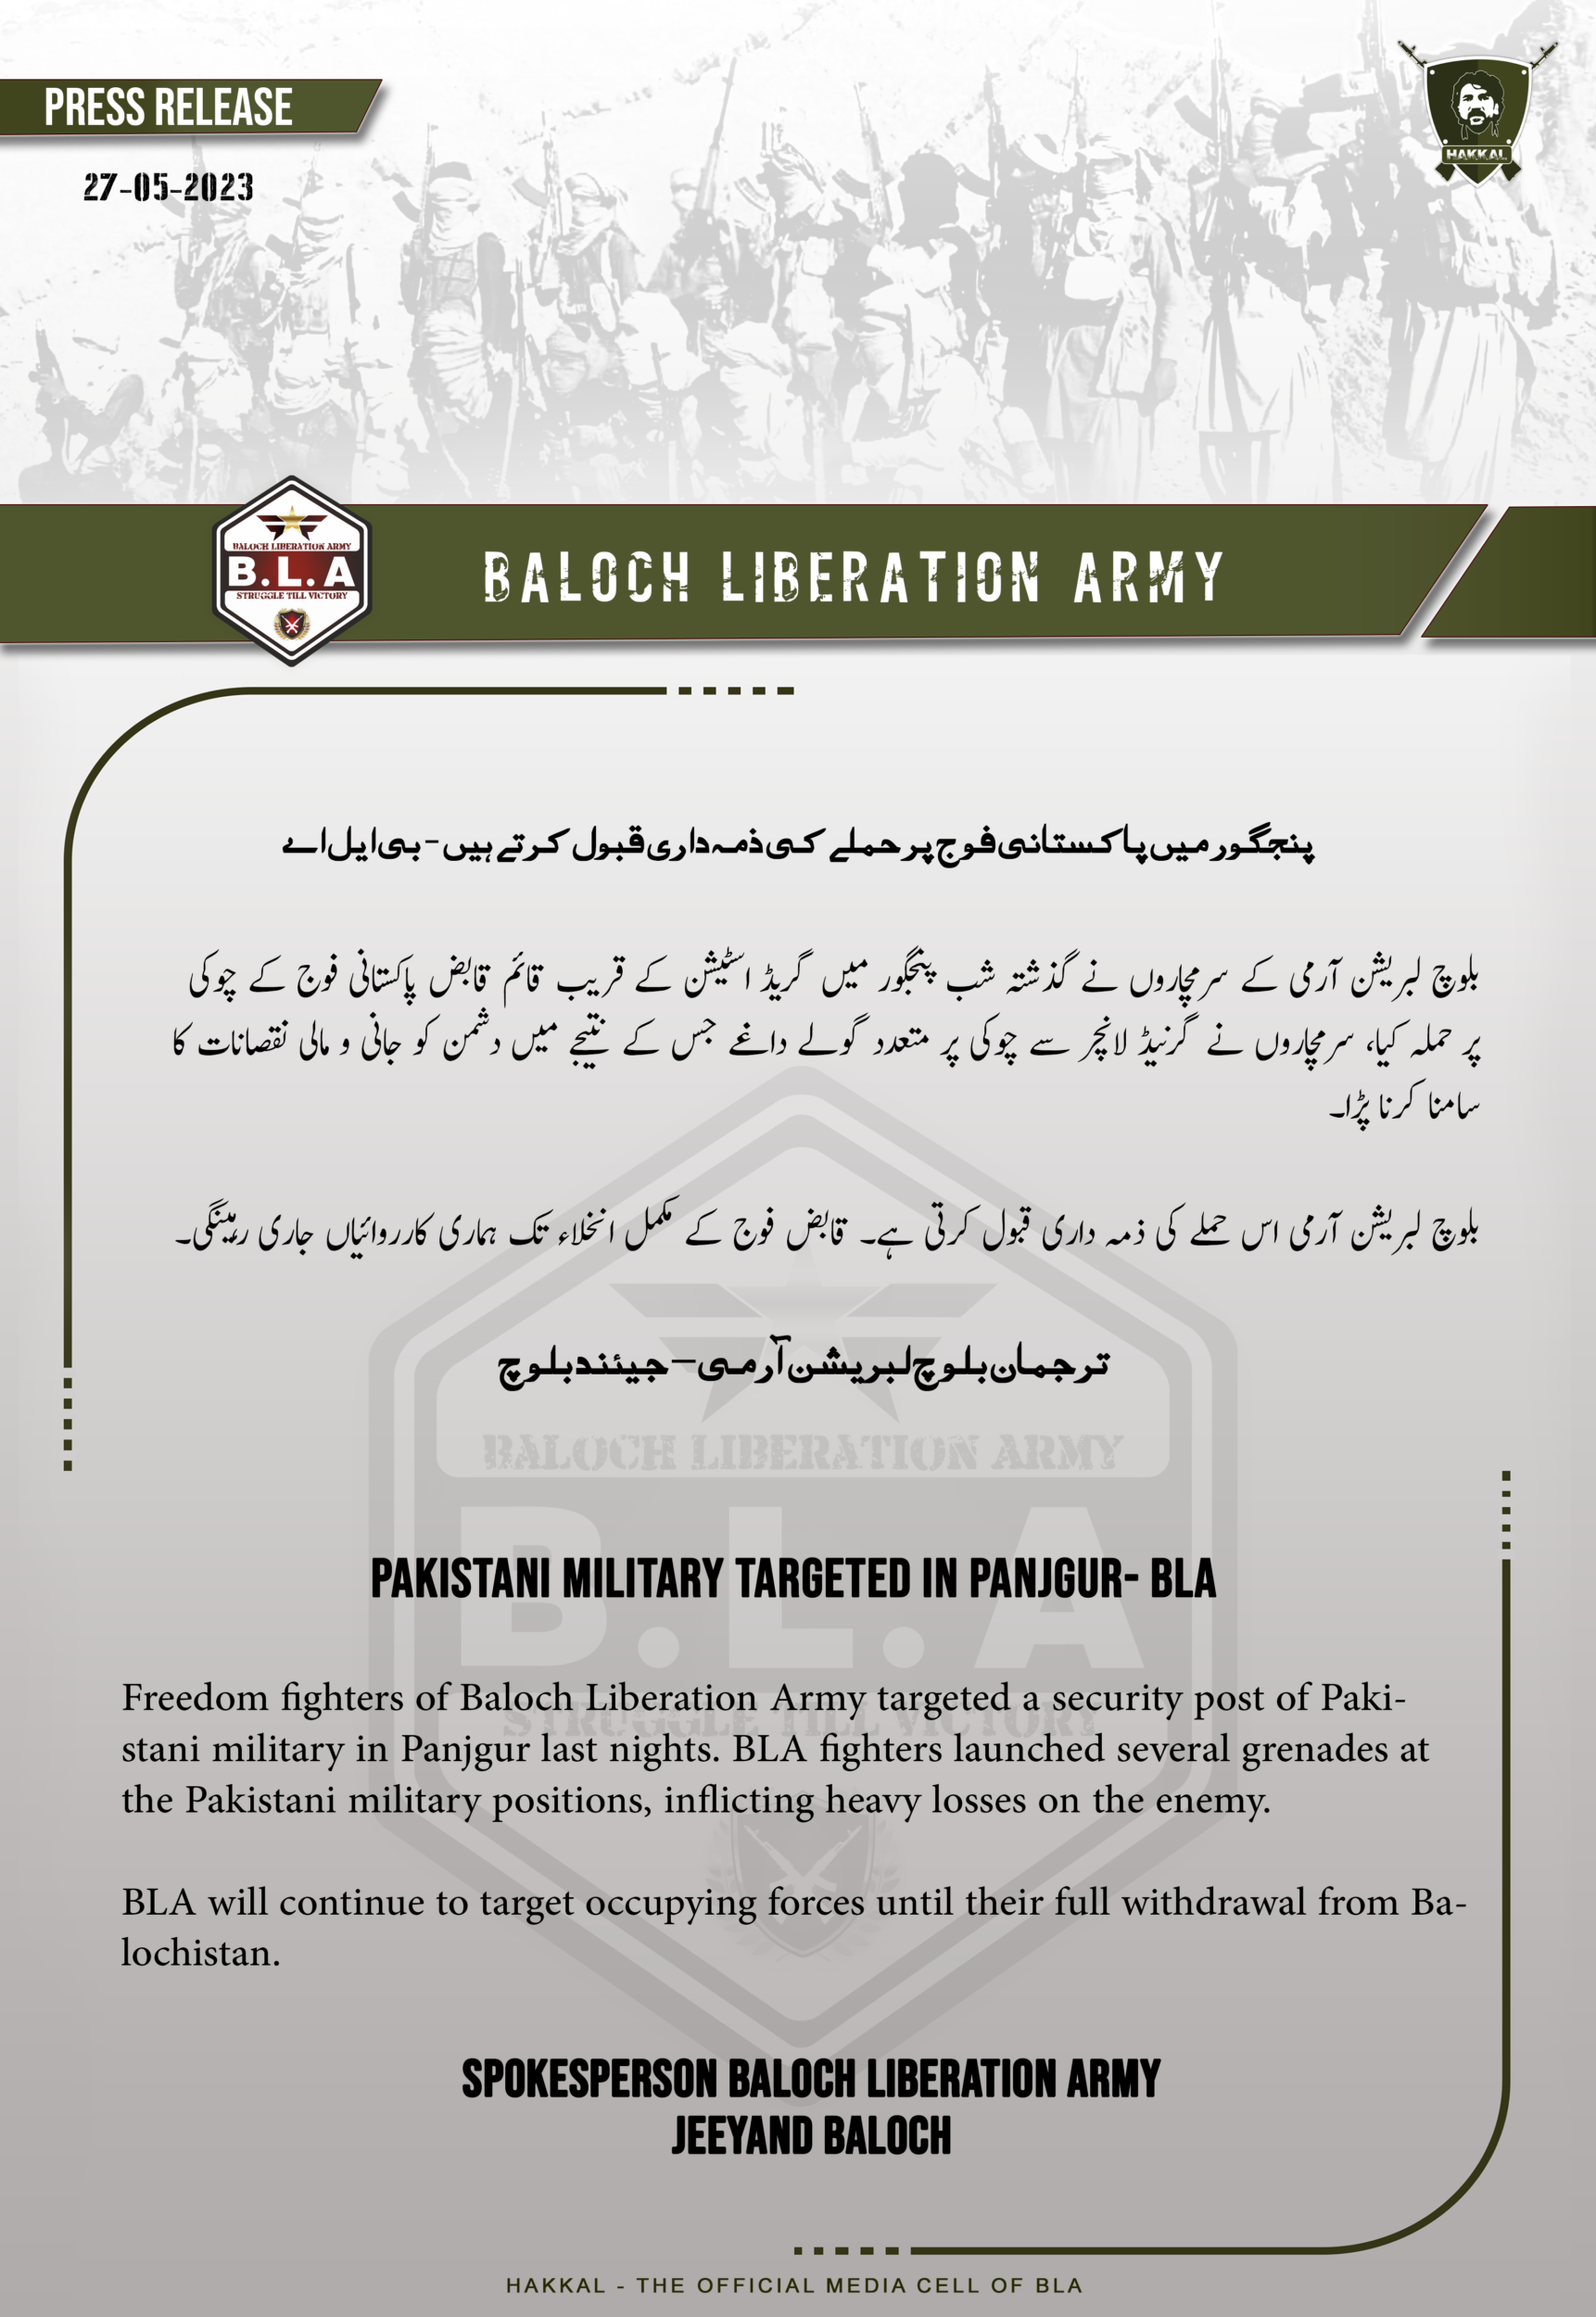 (Claim) Baloch Liberation Army (BLA) Targeted Military Security Post with Grenades in Panjgur, Balochistan, Pakistan - 26 May 2023